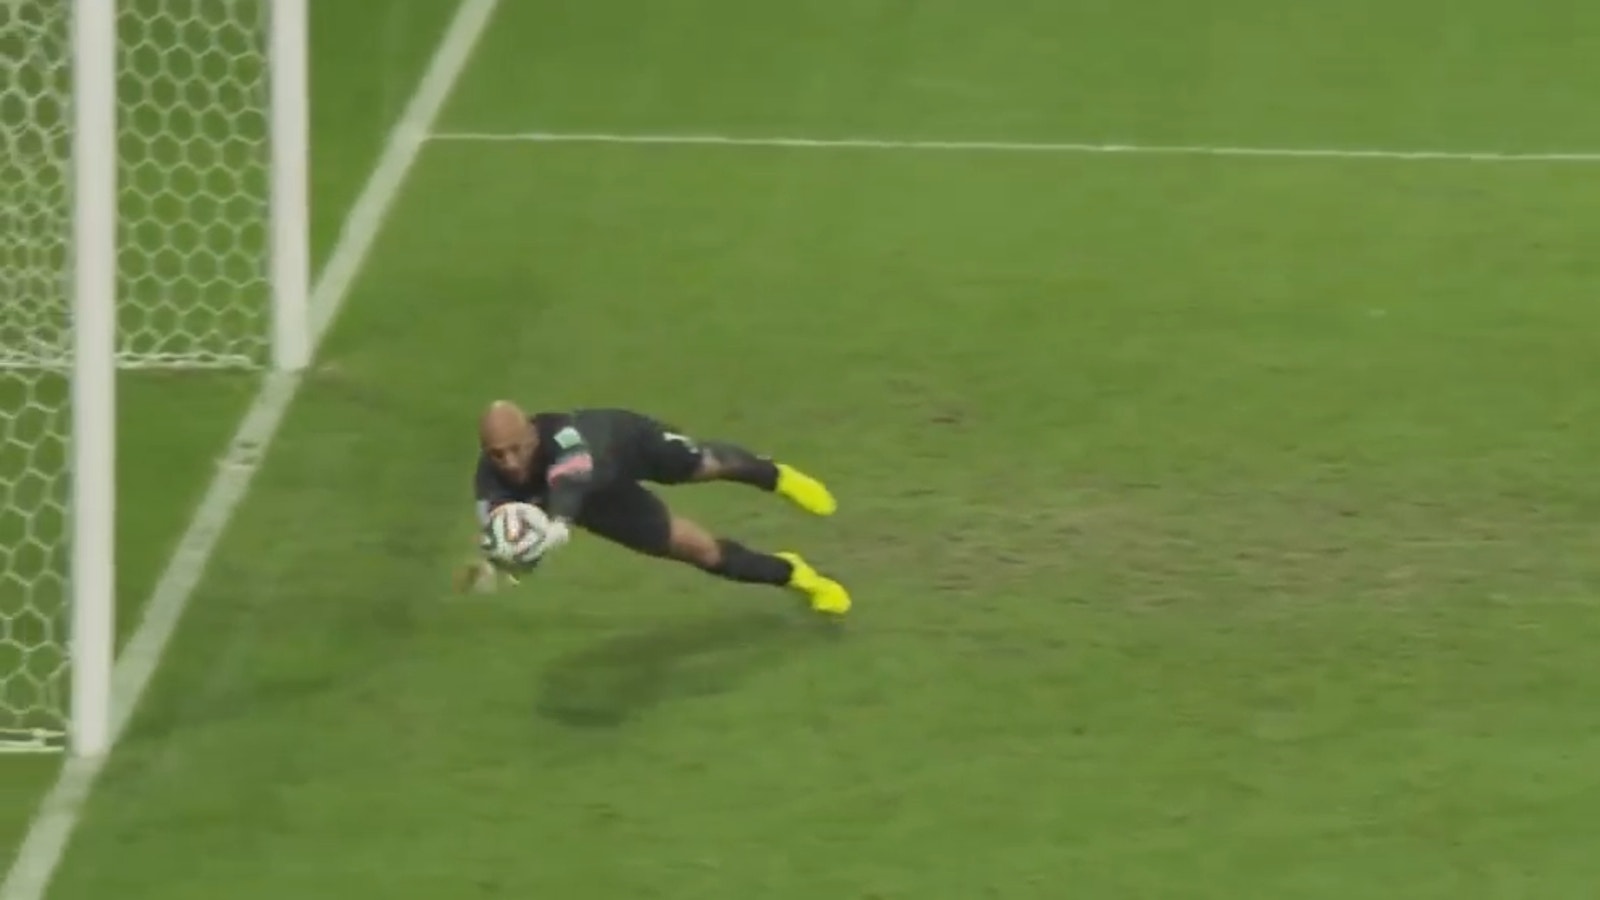 Tim Howard sets saves record: No. 84 | Most Memorable Moments in World Cup History